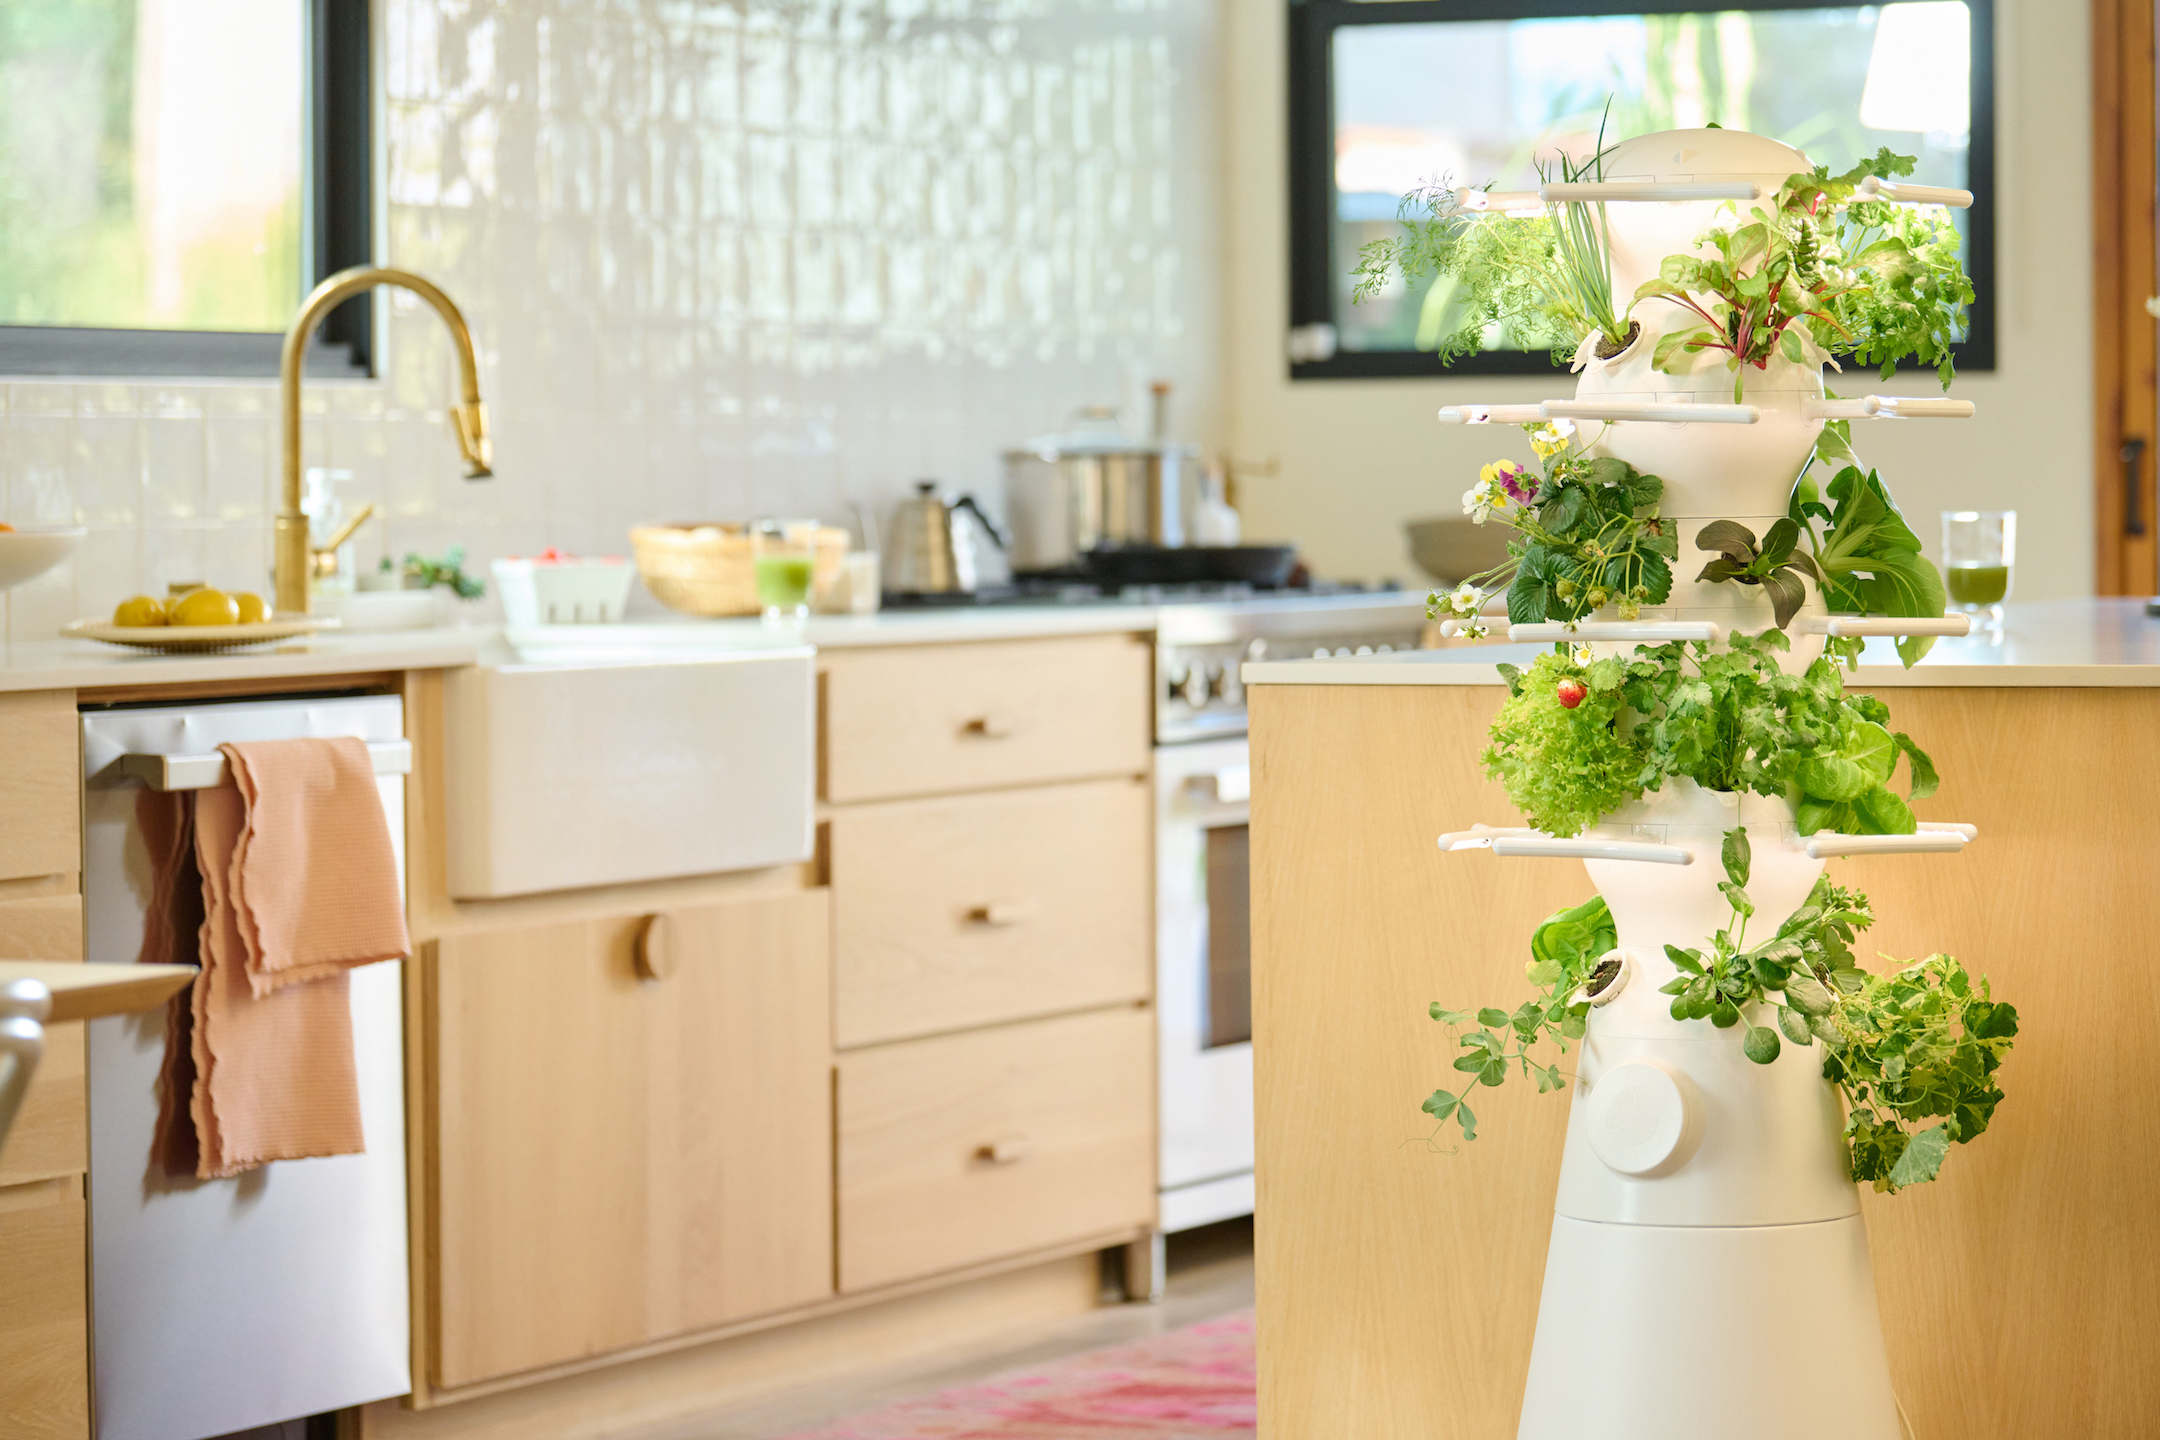 beautiful bright kitchen with white farmstand with lettuce and herbs growing next to island counter